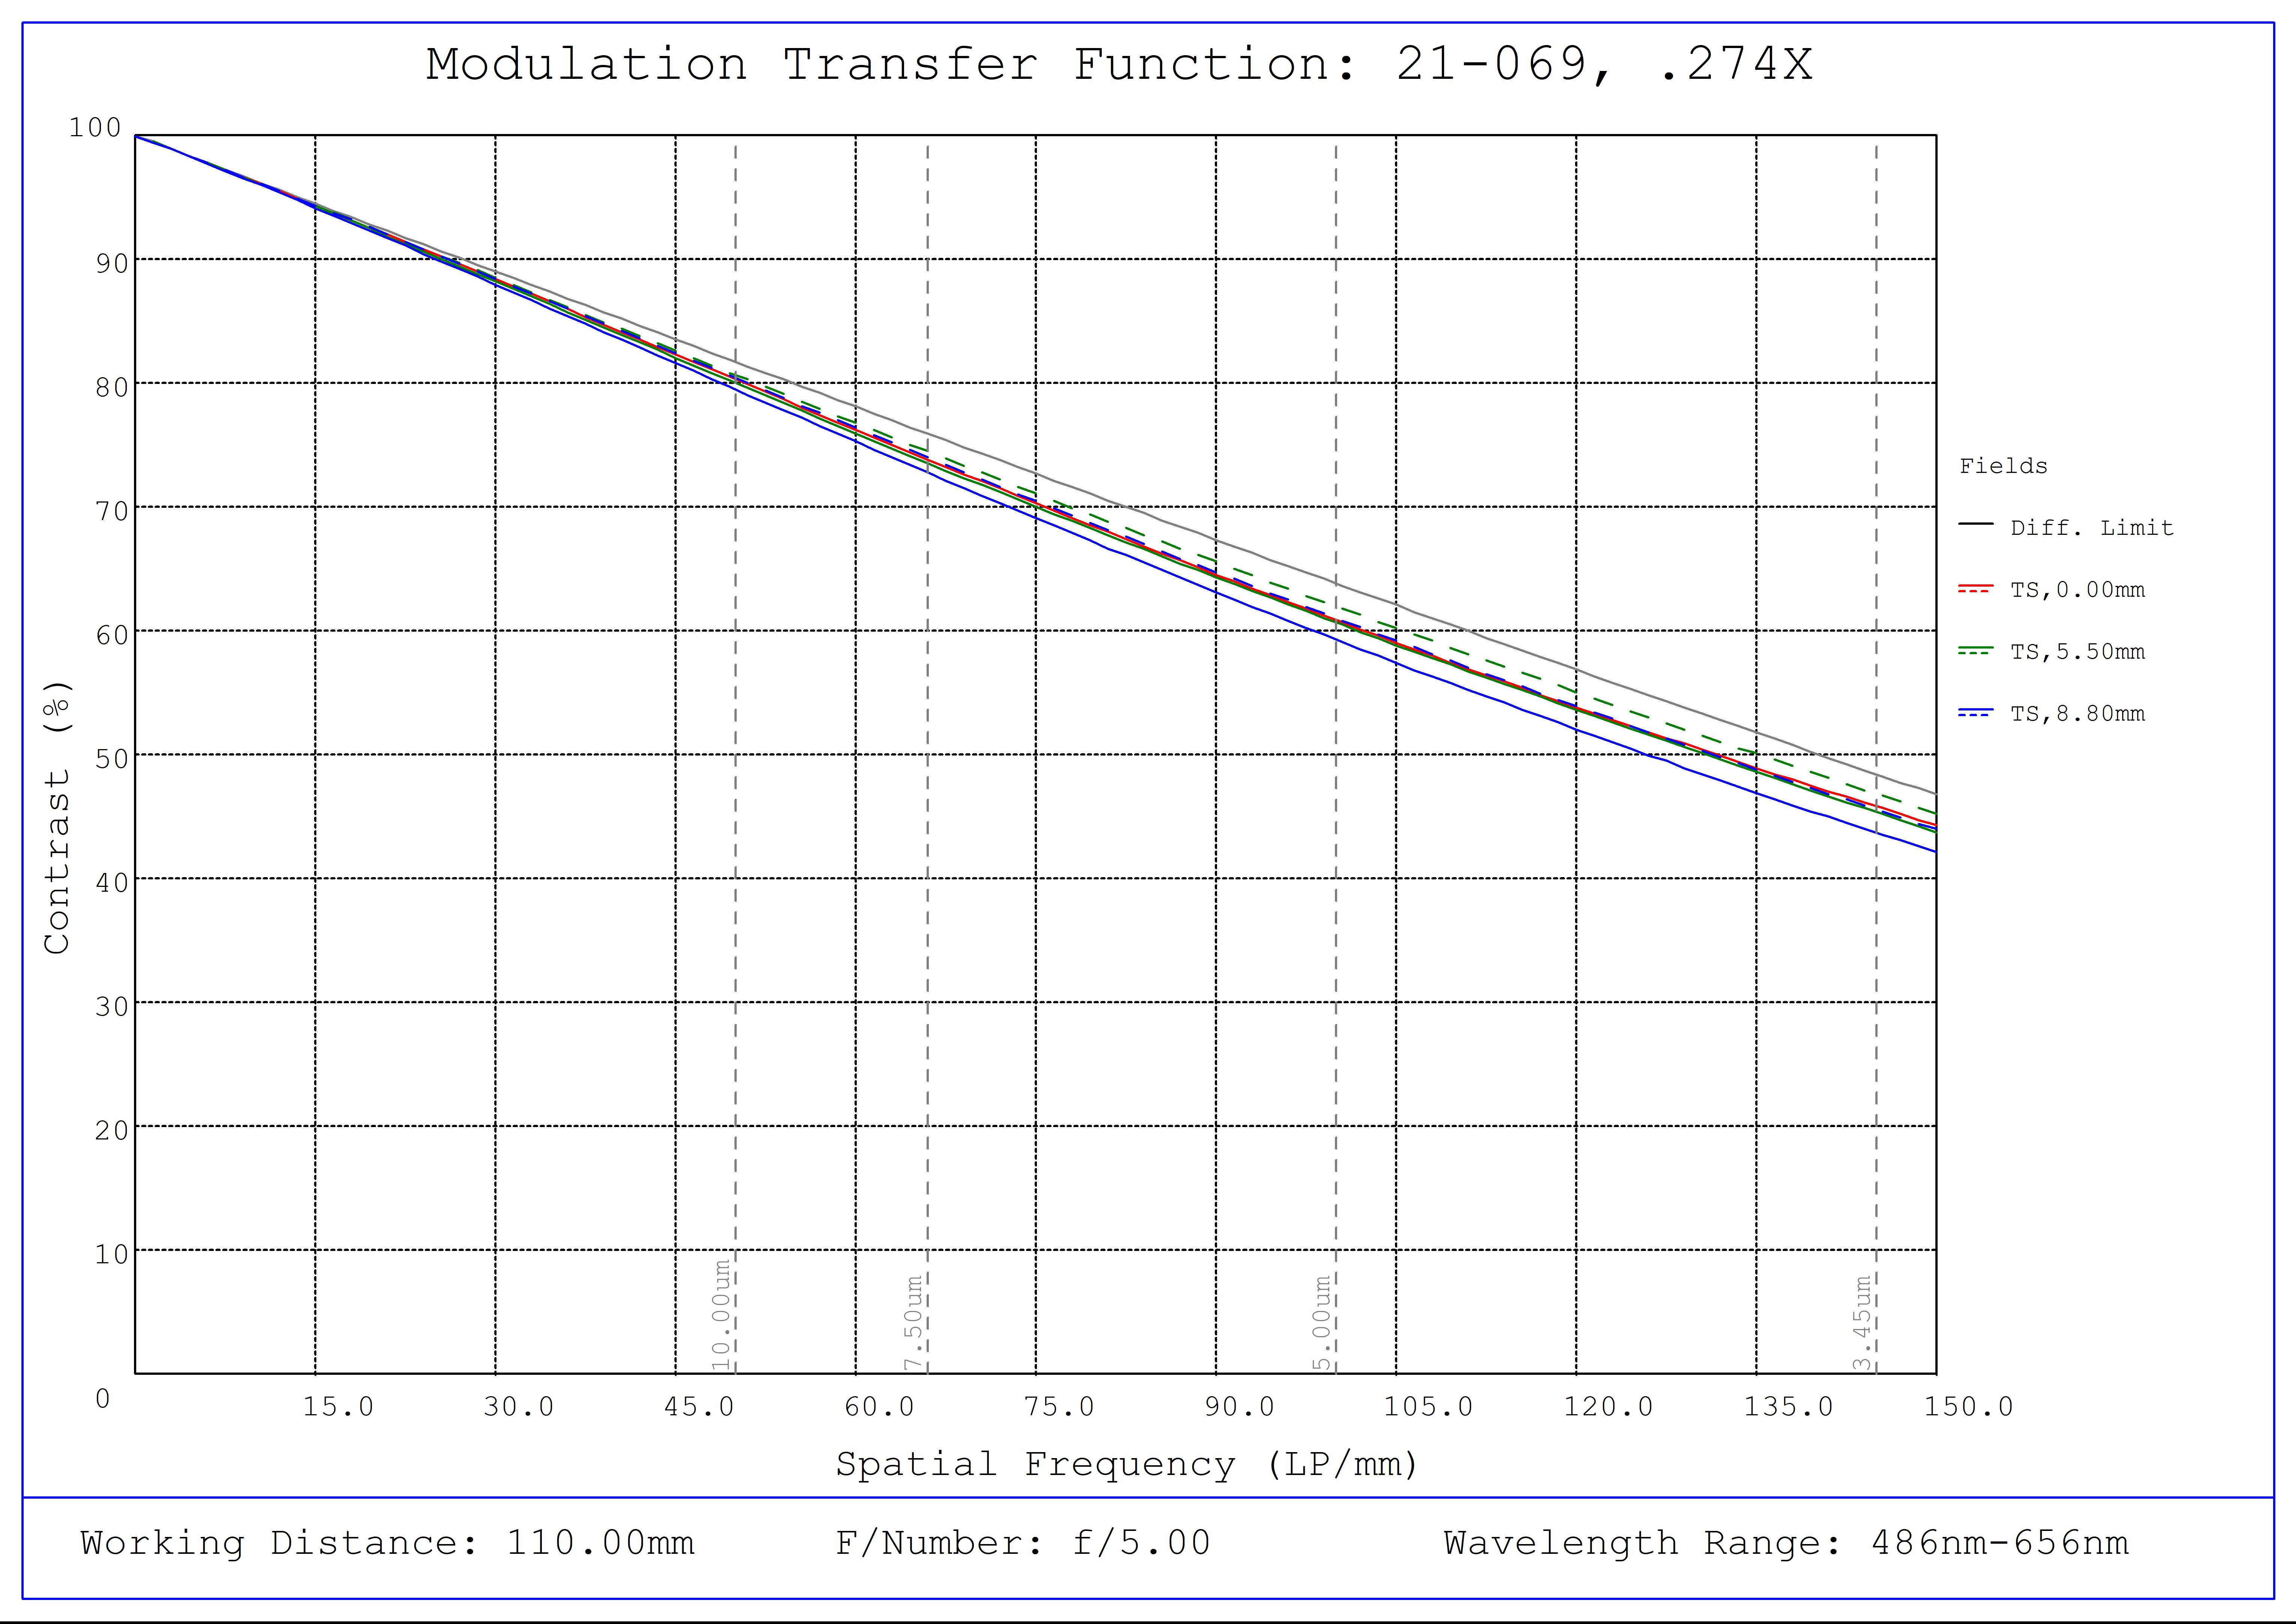 #21-069, 0.274X In-Line CobaltTL Telecentric Lens, Modulated Transfer Function (MTF) Plot, 110mm Working Distance, f5